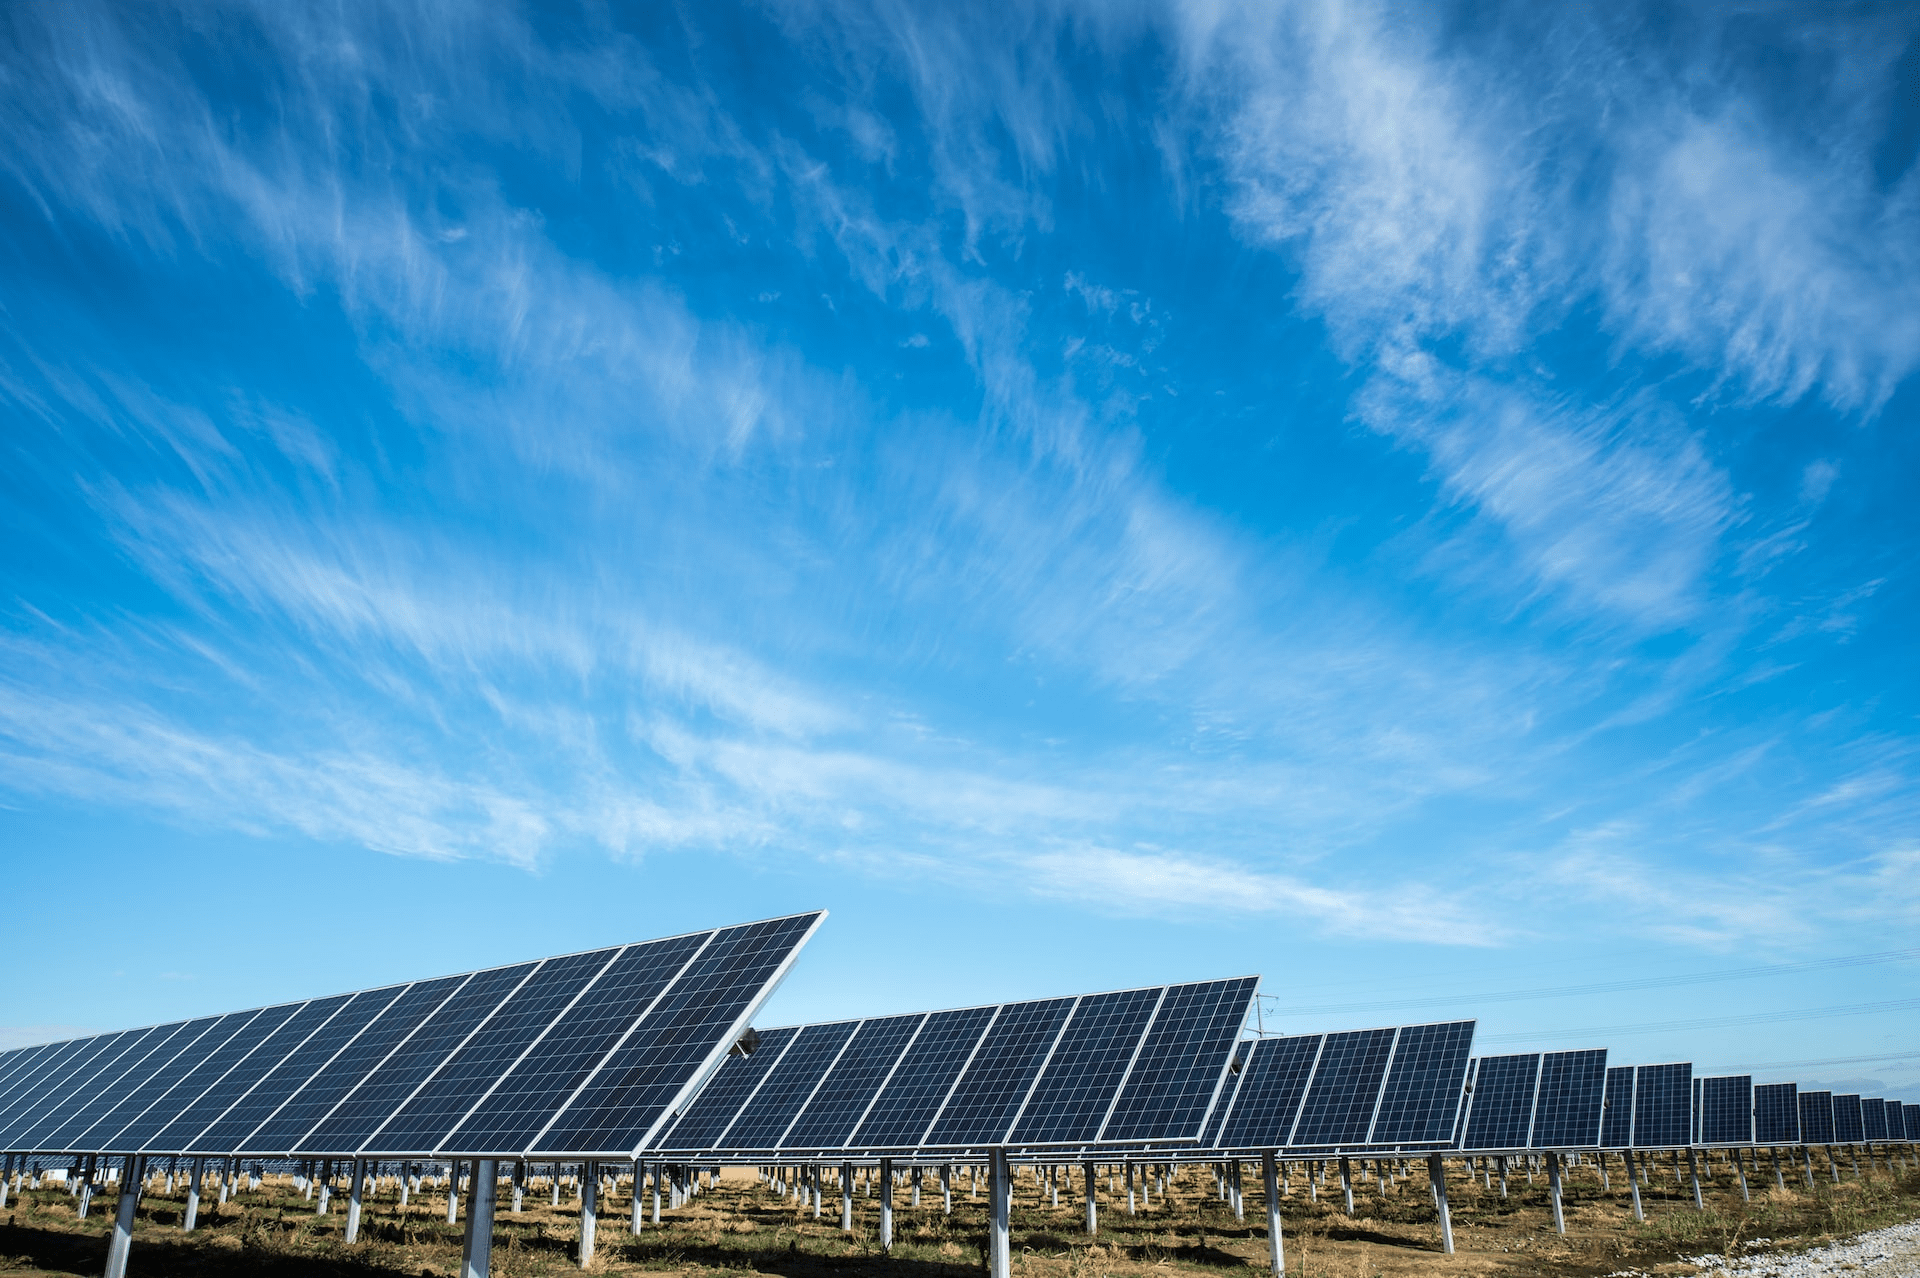 Solar PV panel waste will not become a significant problem
